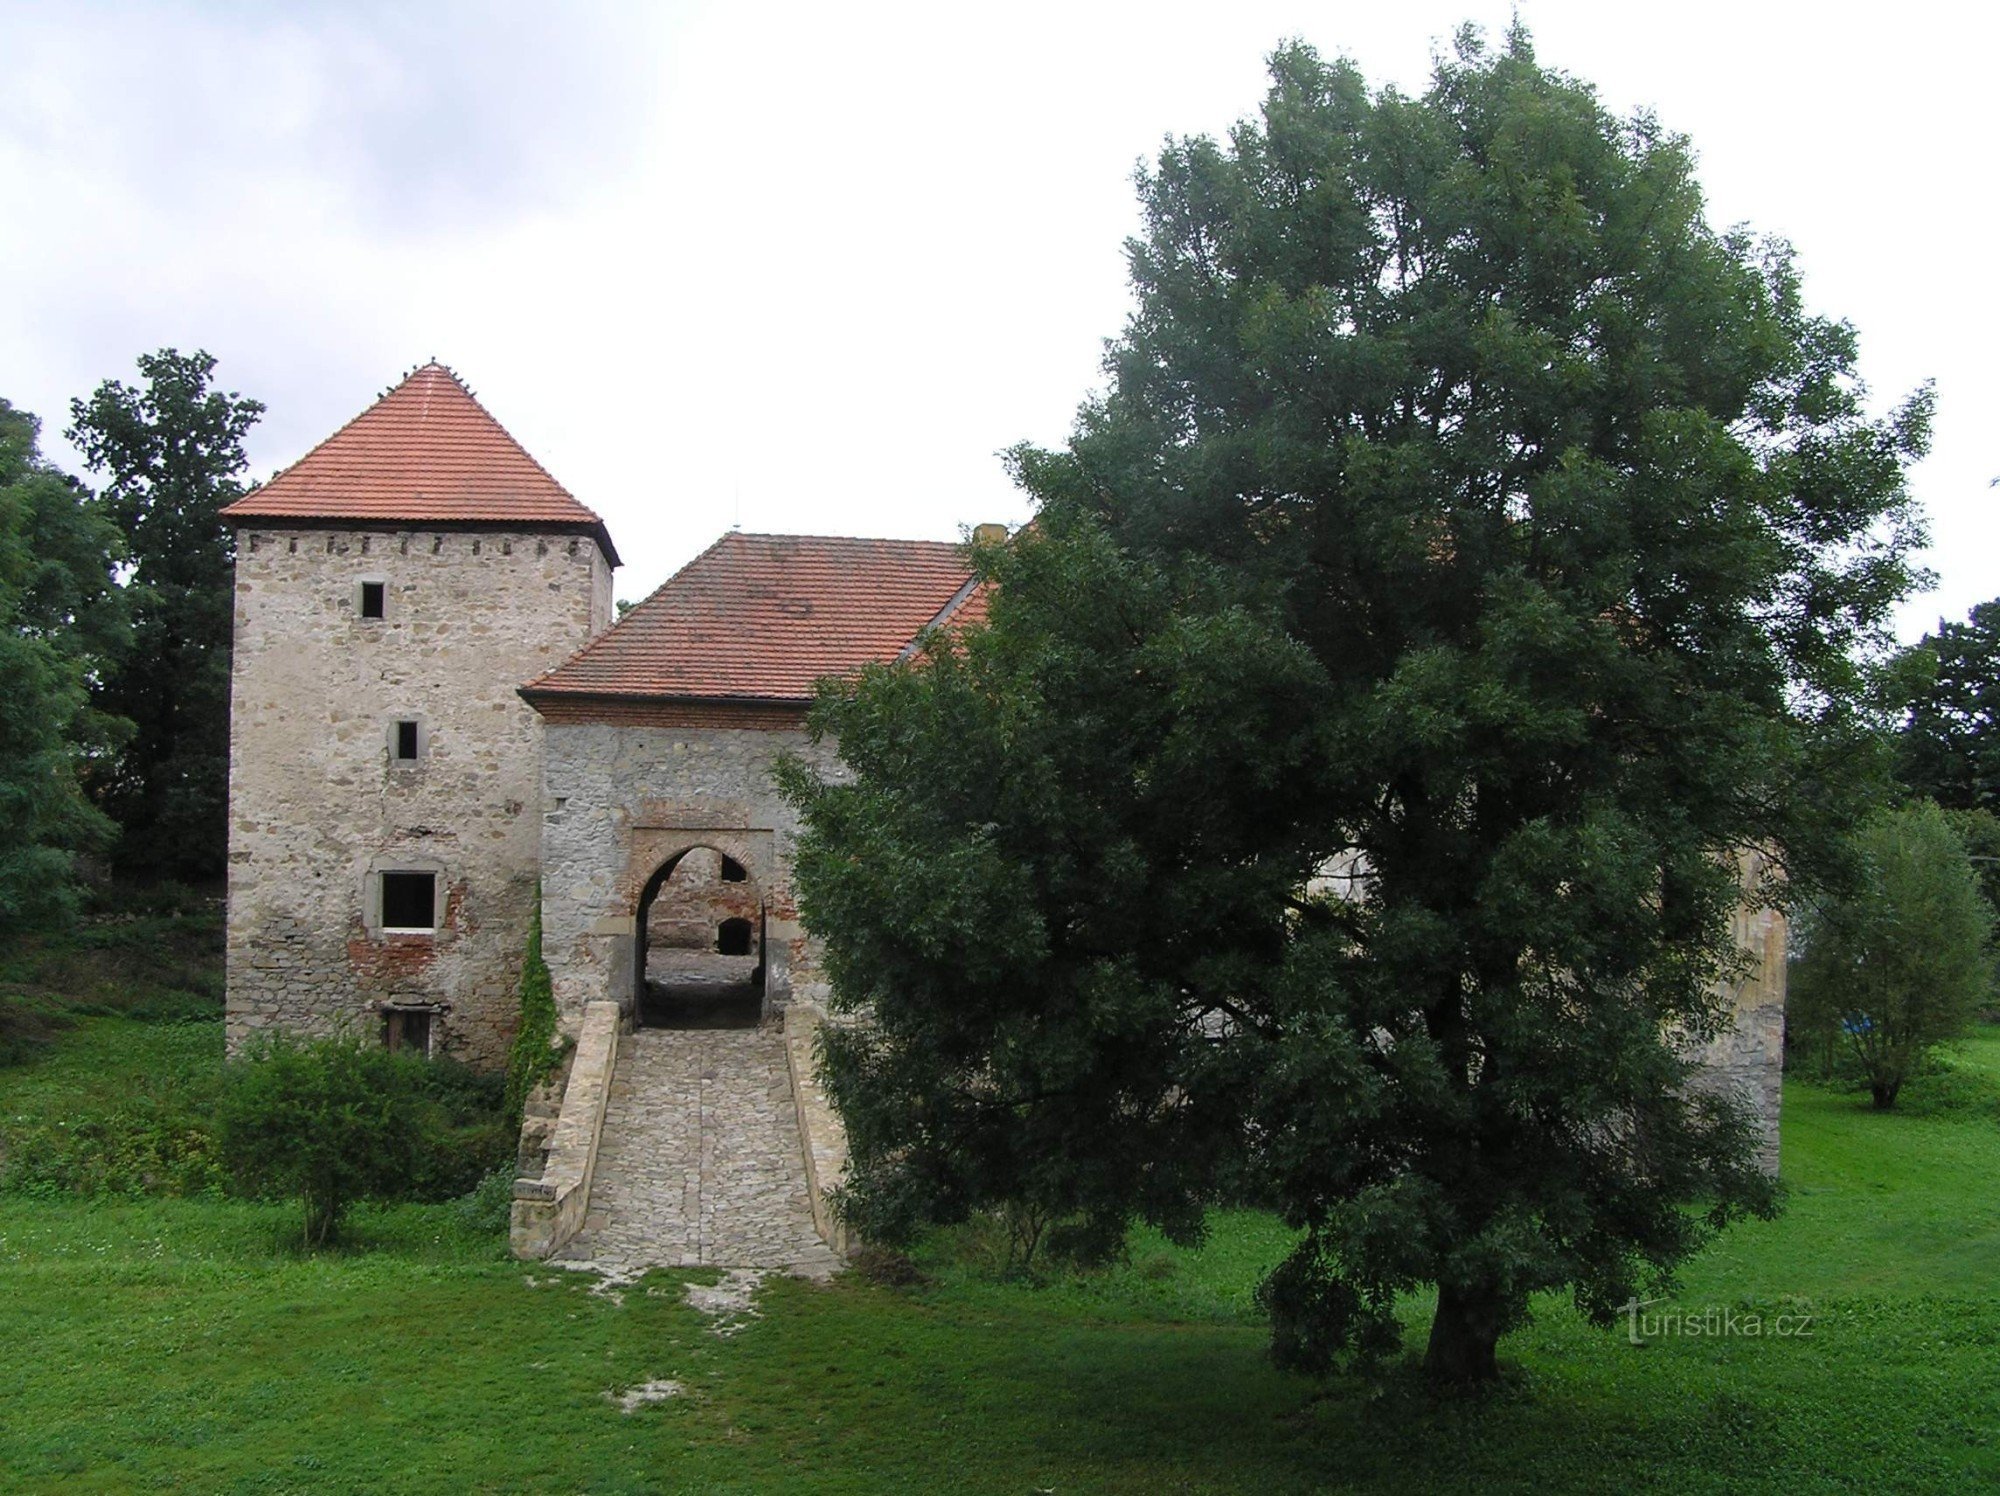 View of the Upper Fortress from the castle